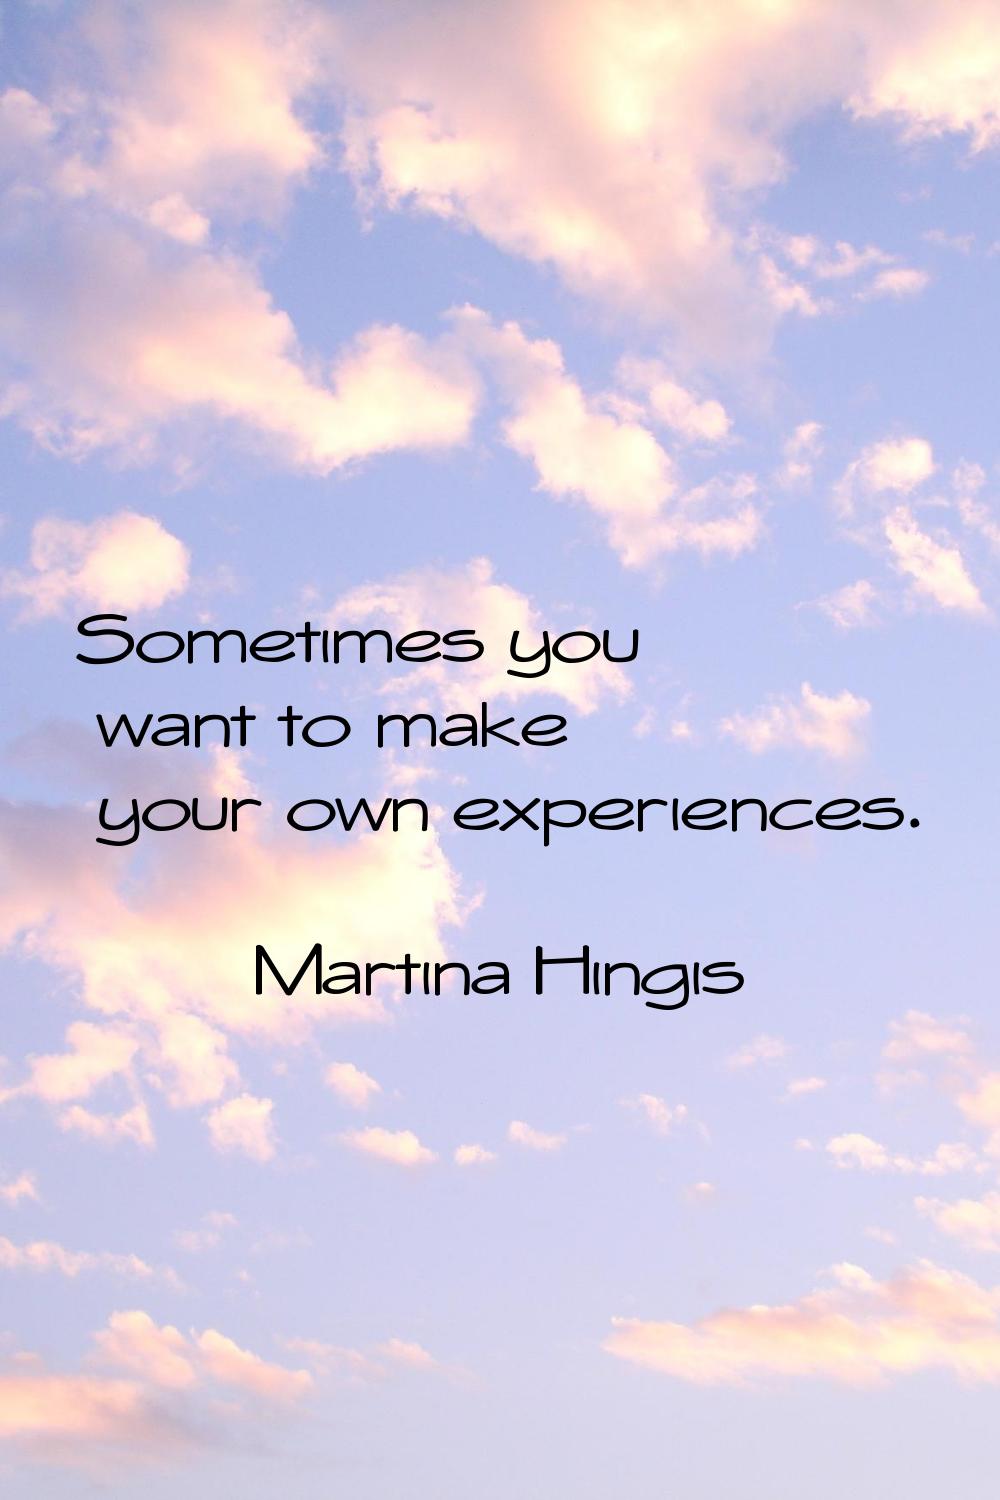 Sometimes you want to make your own experiences.